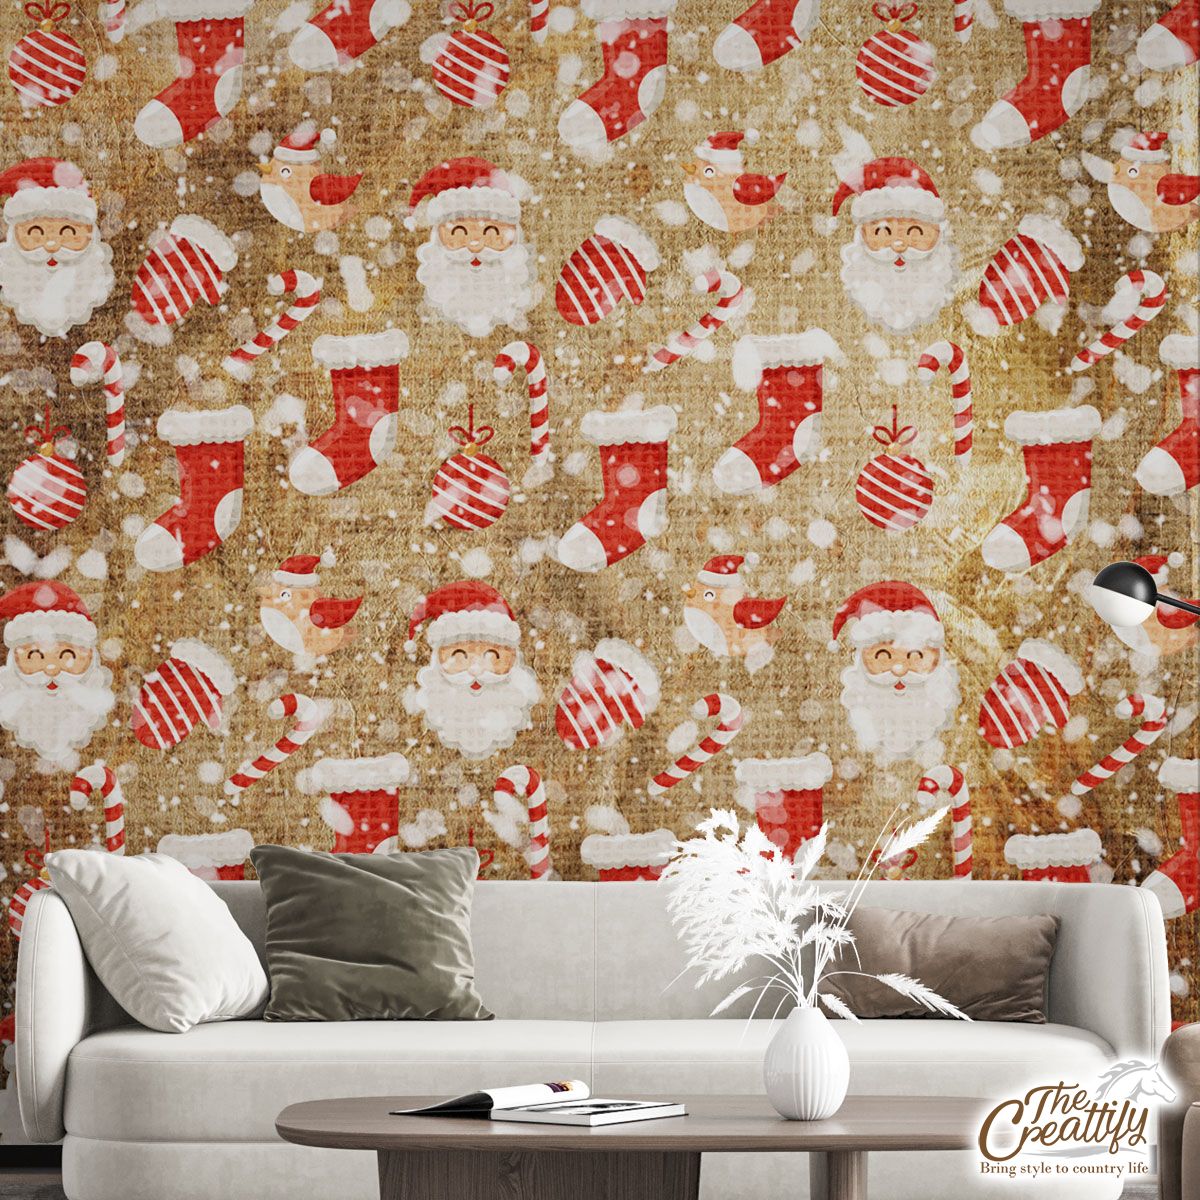 Santa Clause, Red Socks, Candy Canes And Cardinal Bird On Snowflake Wall Mural